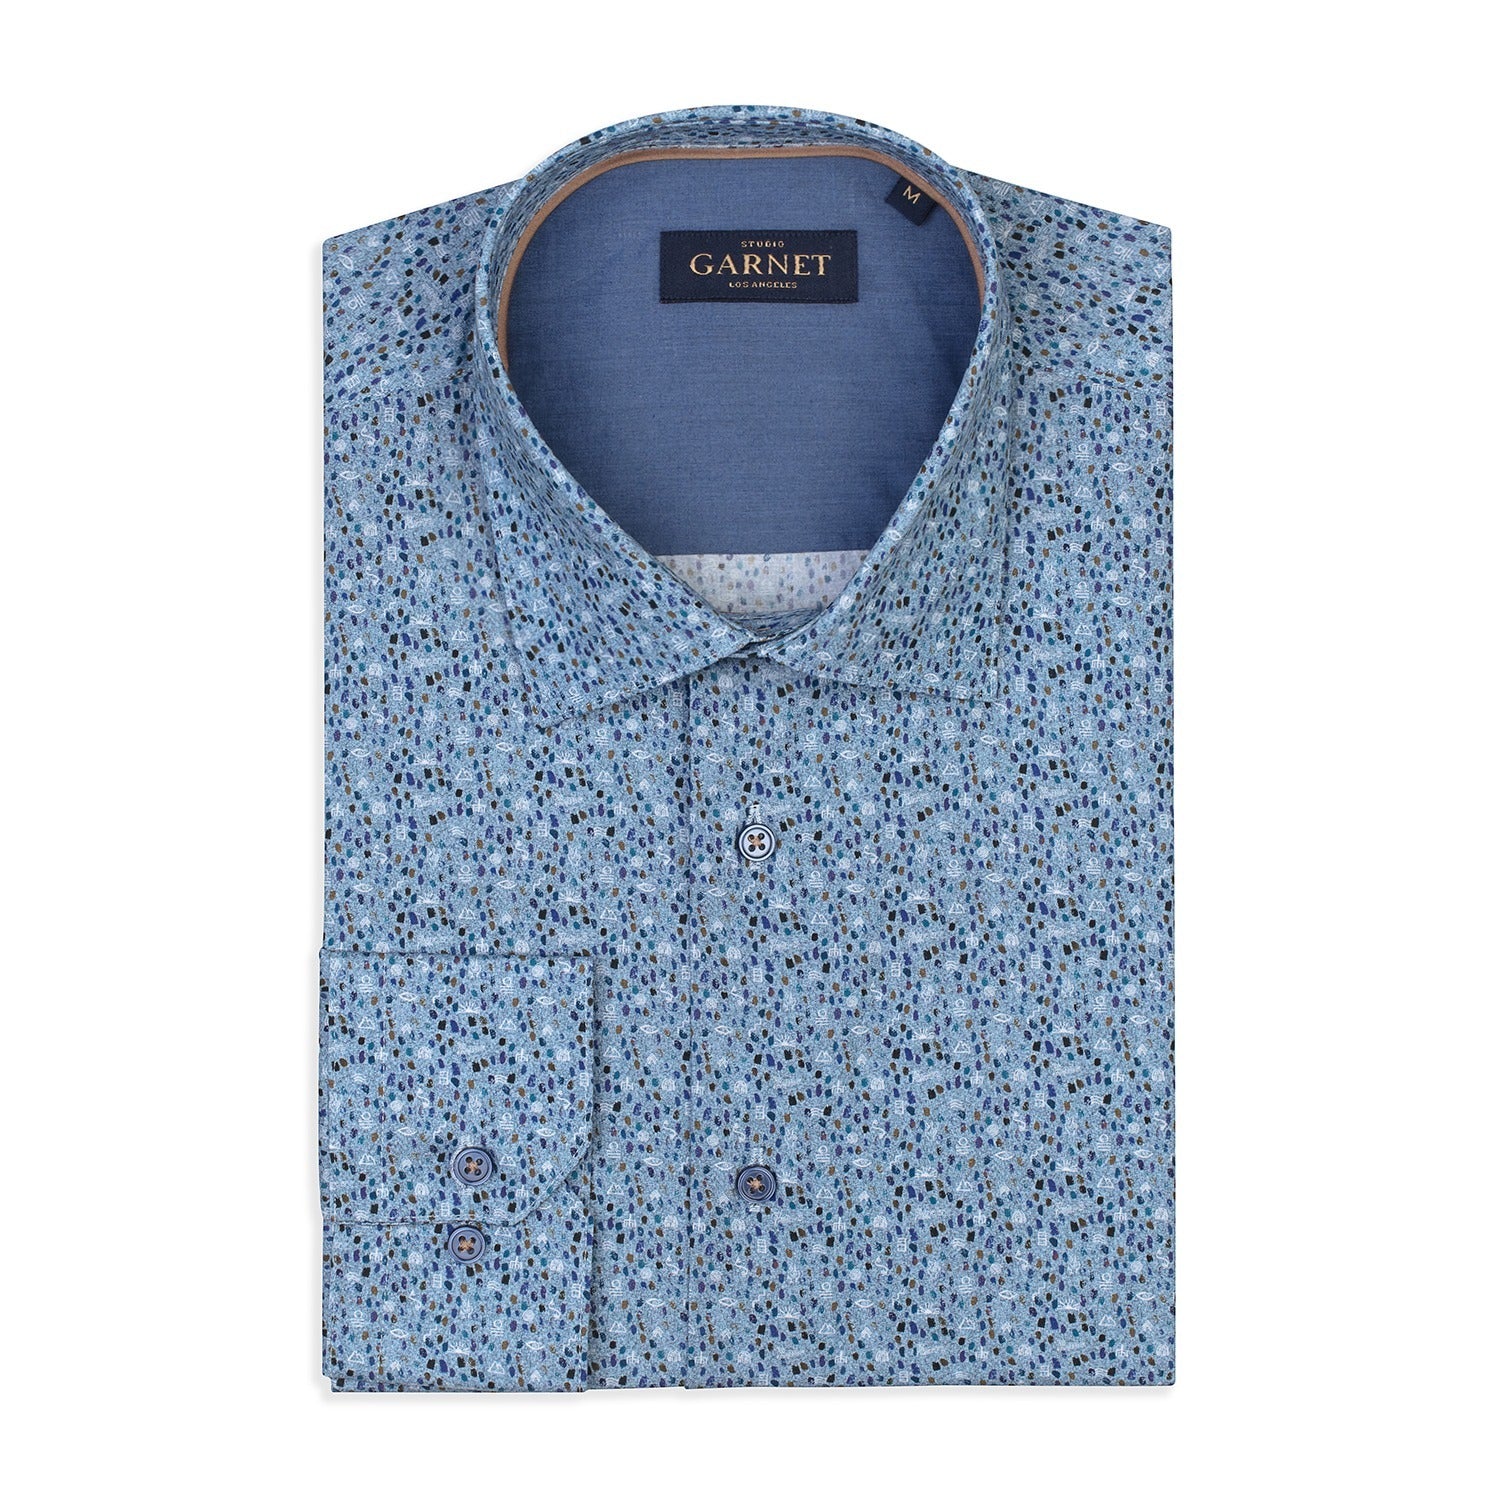 Speckled Printed Blue Long Sleeve Cotton Shirt